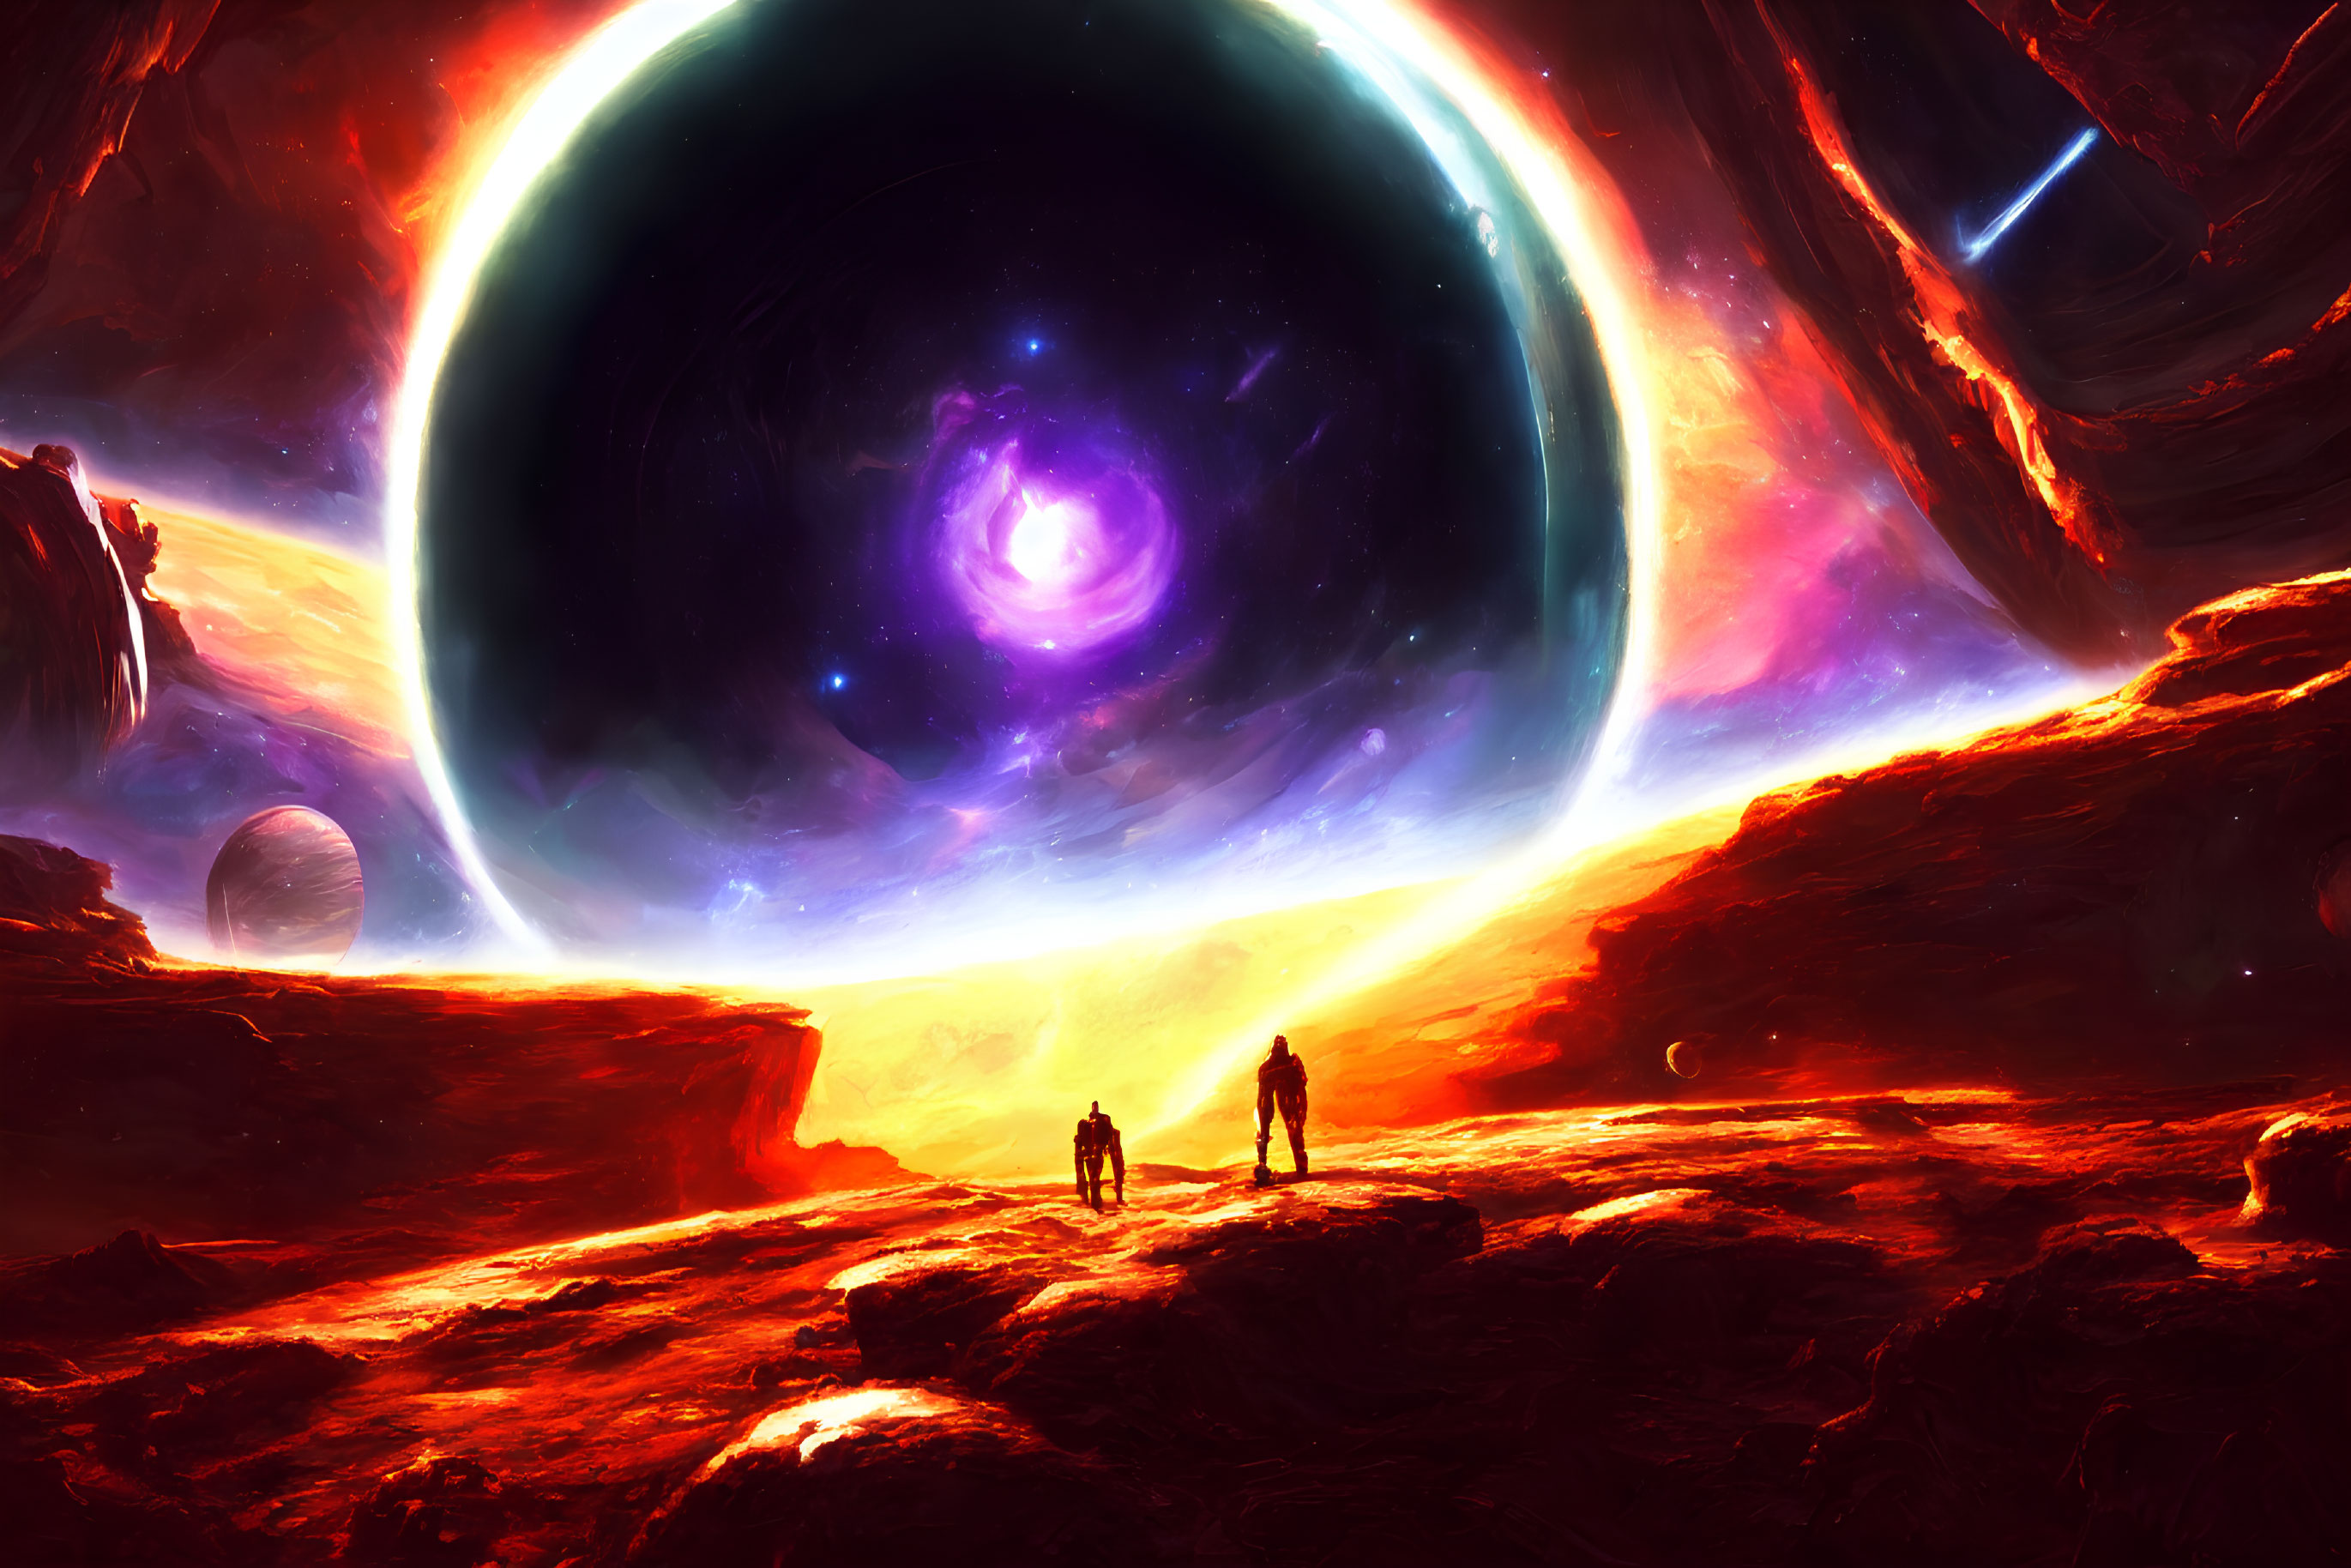 Silhouetted figures on rocky terrain with cosmic backdrop featuring black hole, nebulae, planets